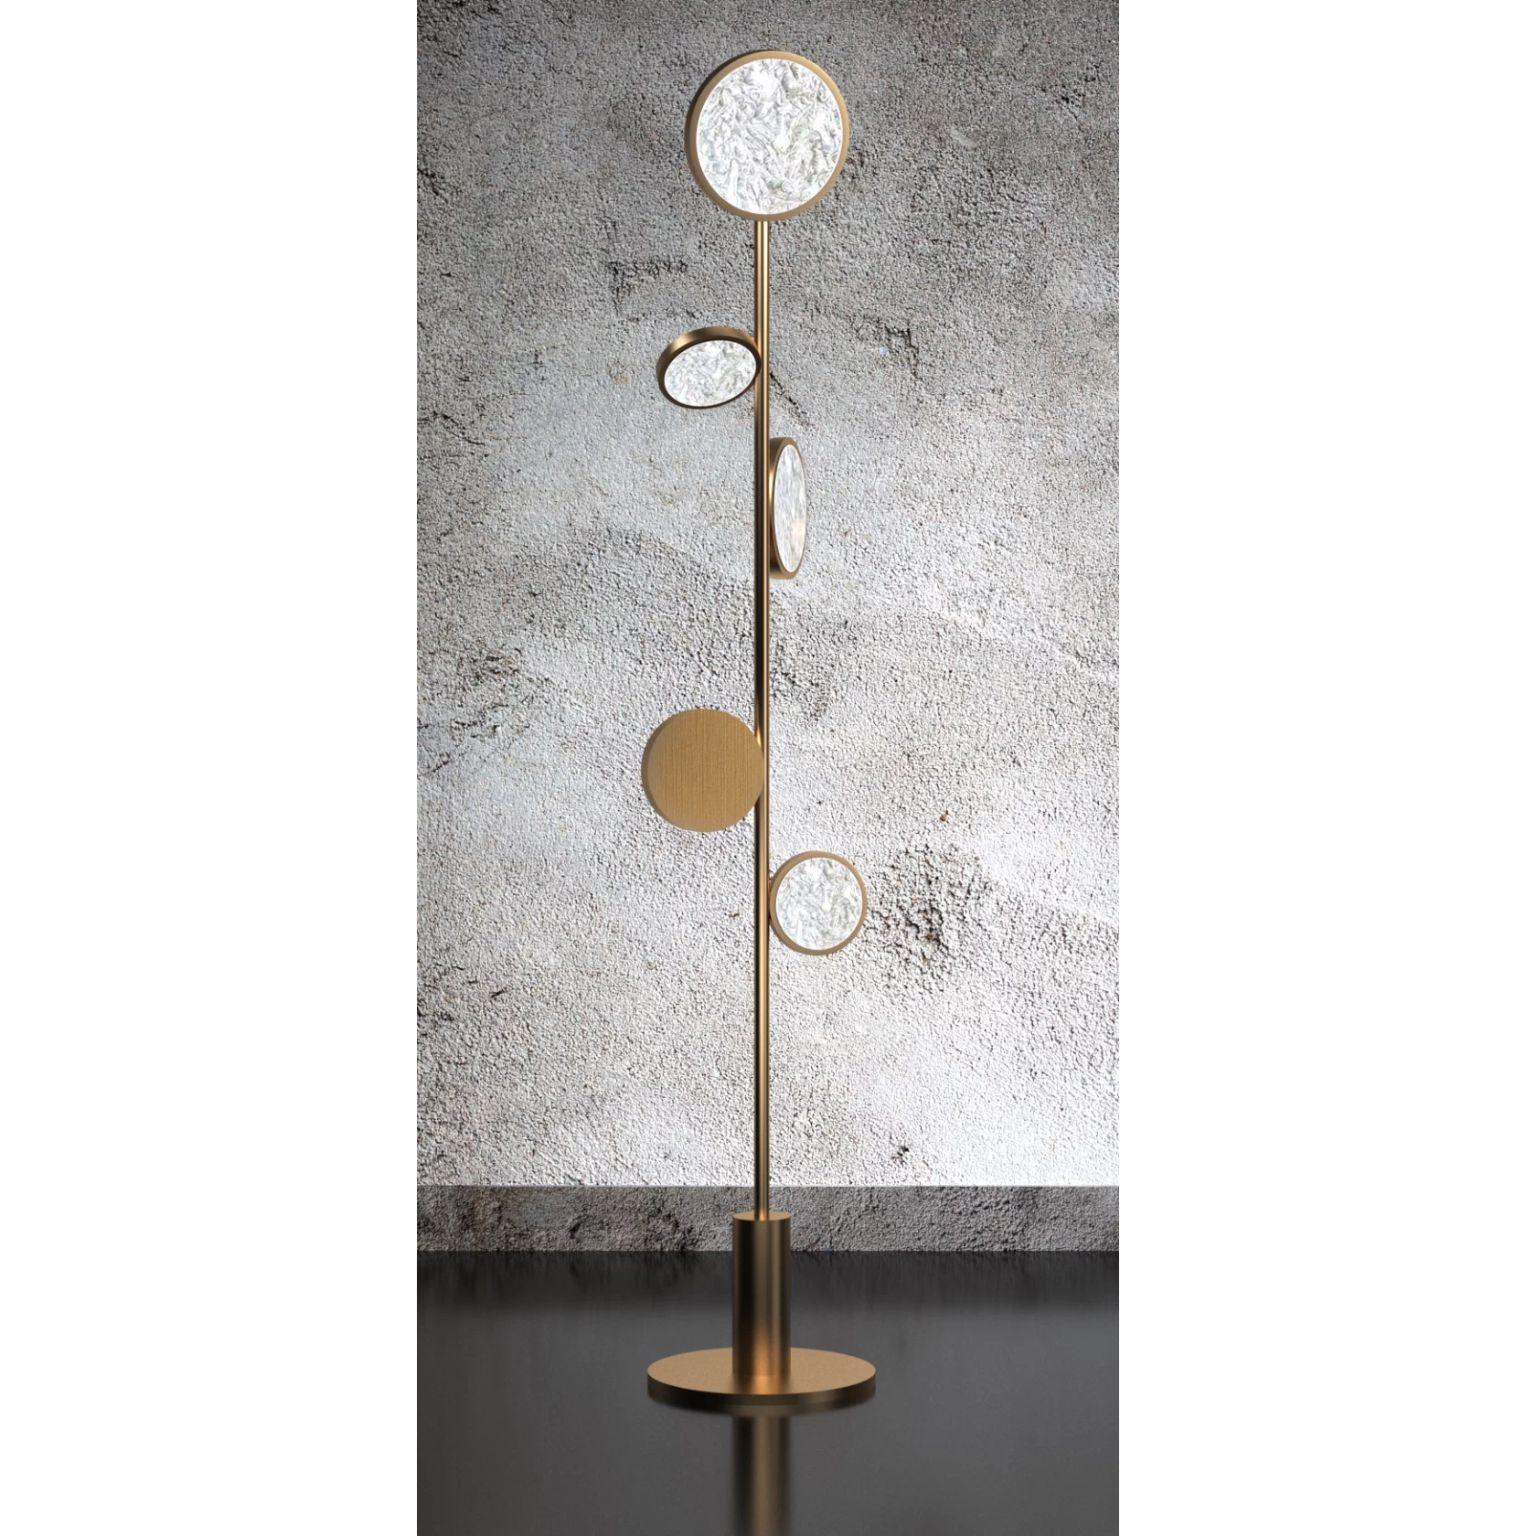 Circles Floor Lamp by Dainte
Dimensions: Ø 40 x H 62.51 cm.
Materials: Glass and brass. 

Introducing the stunning Floor Lamp made with brass circles. Designed with elegance in mind, this lamp adds a touch of sophistication to any room. The